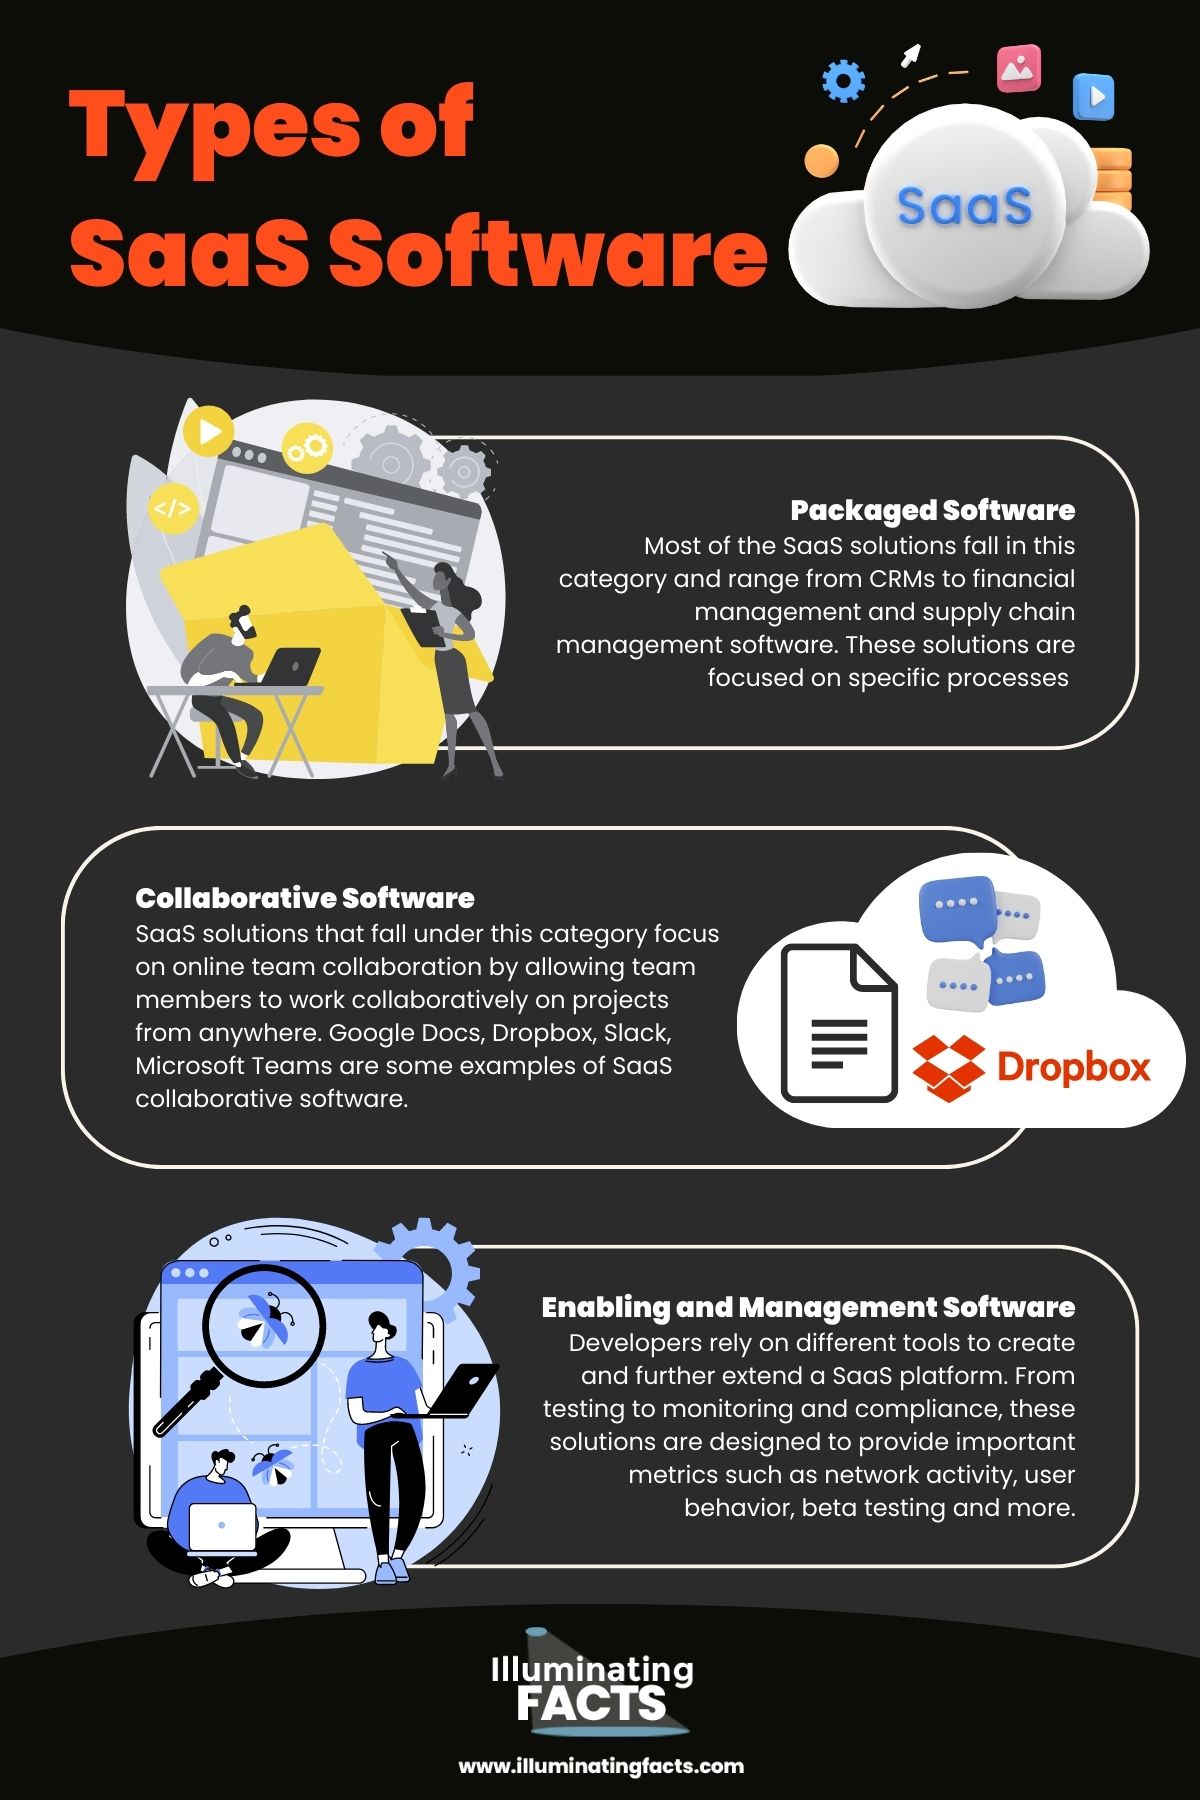 An infographic of some of the different types of SaaS software